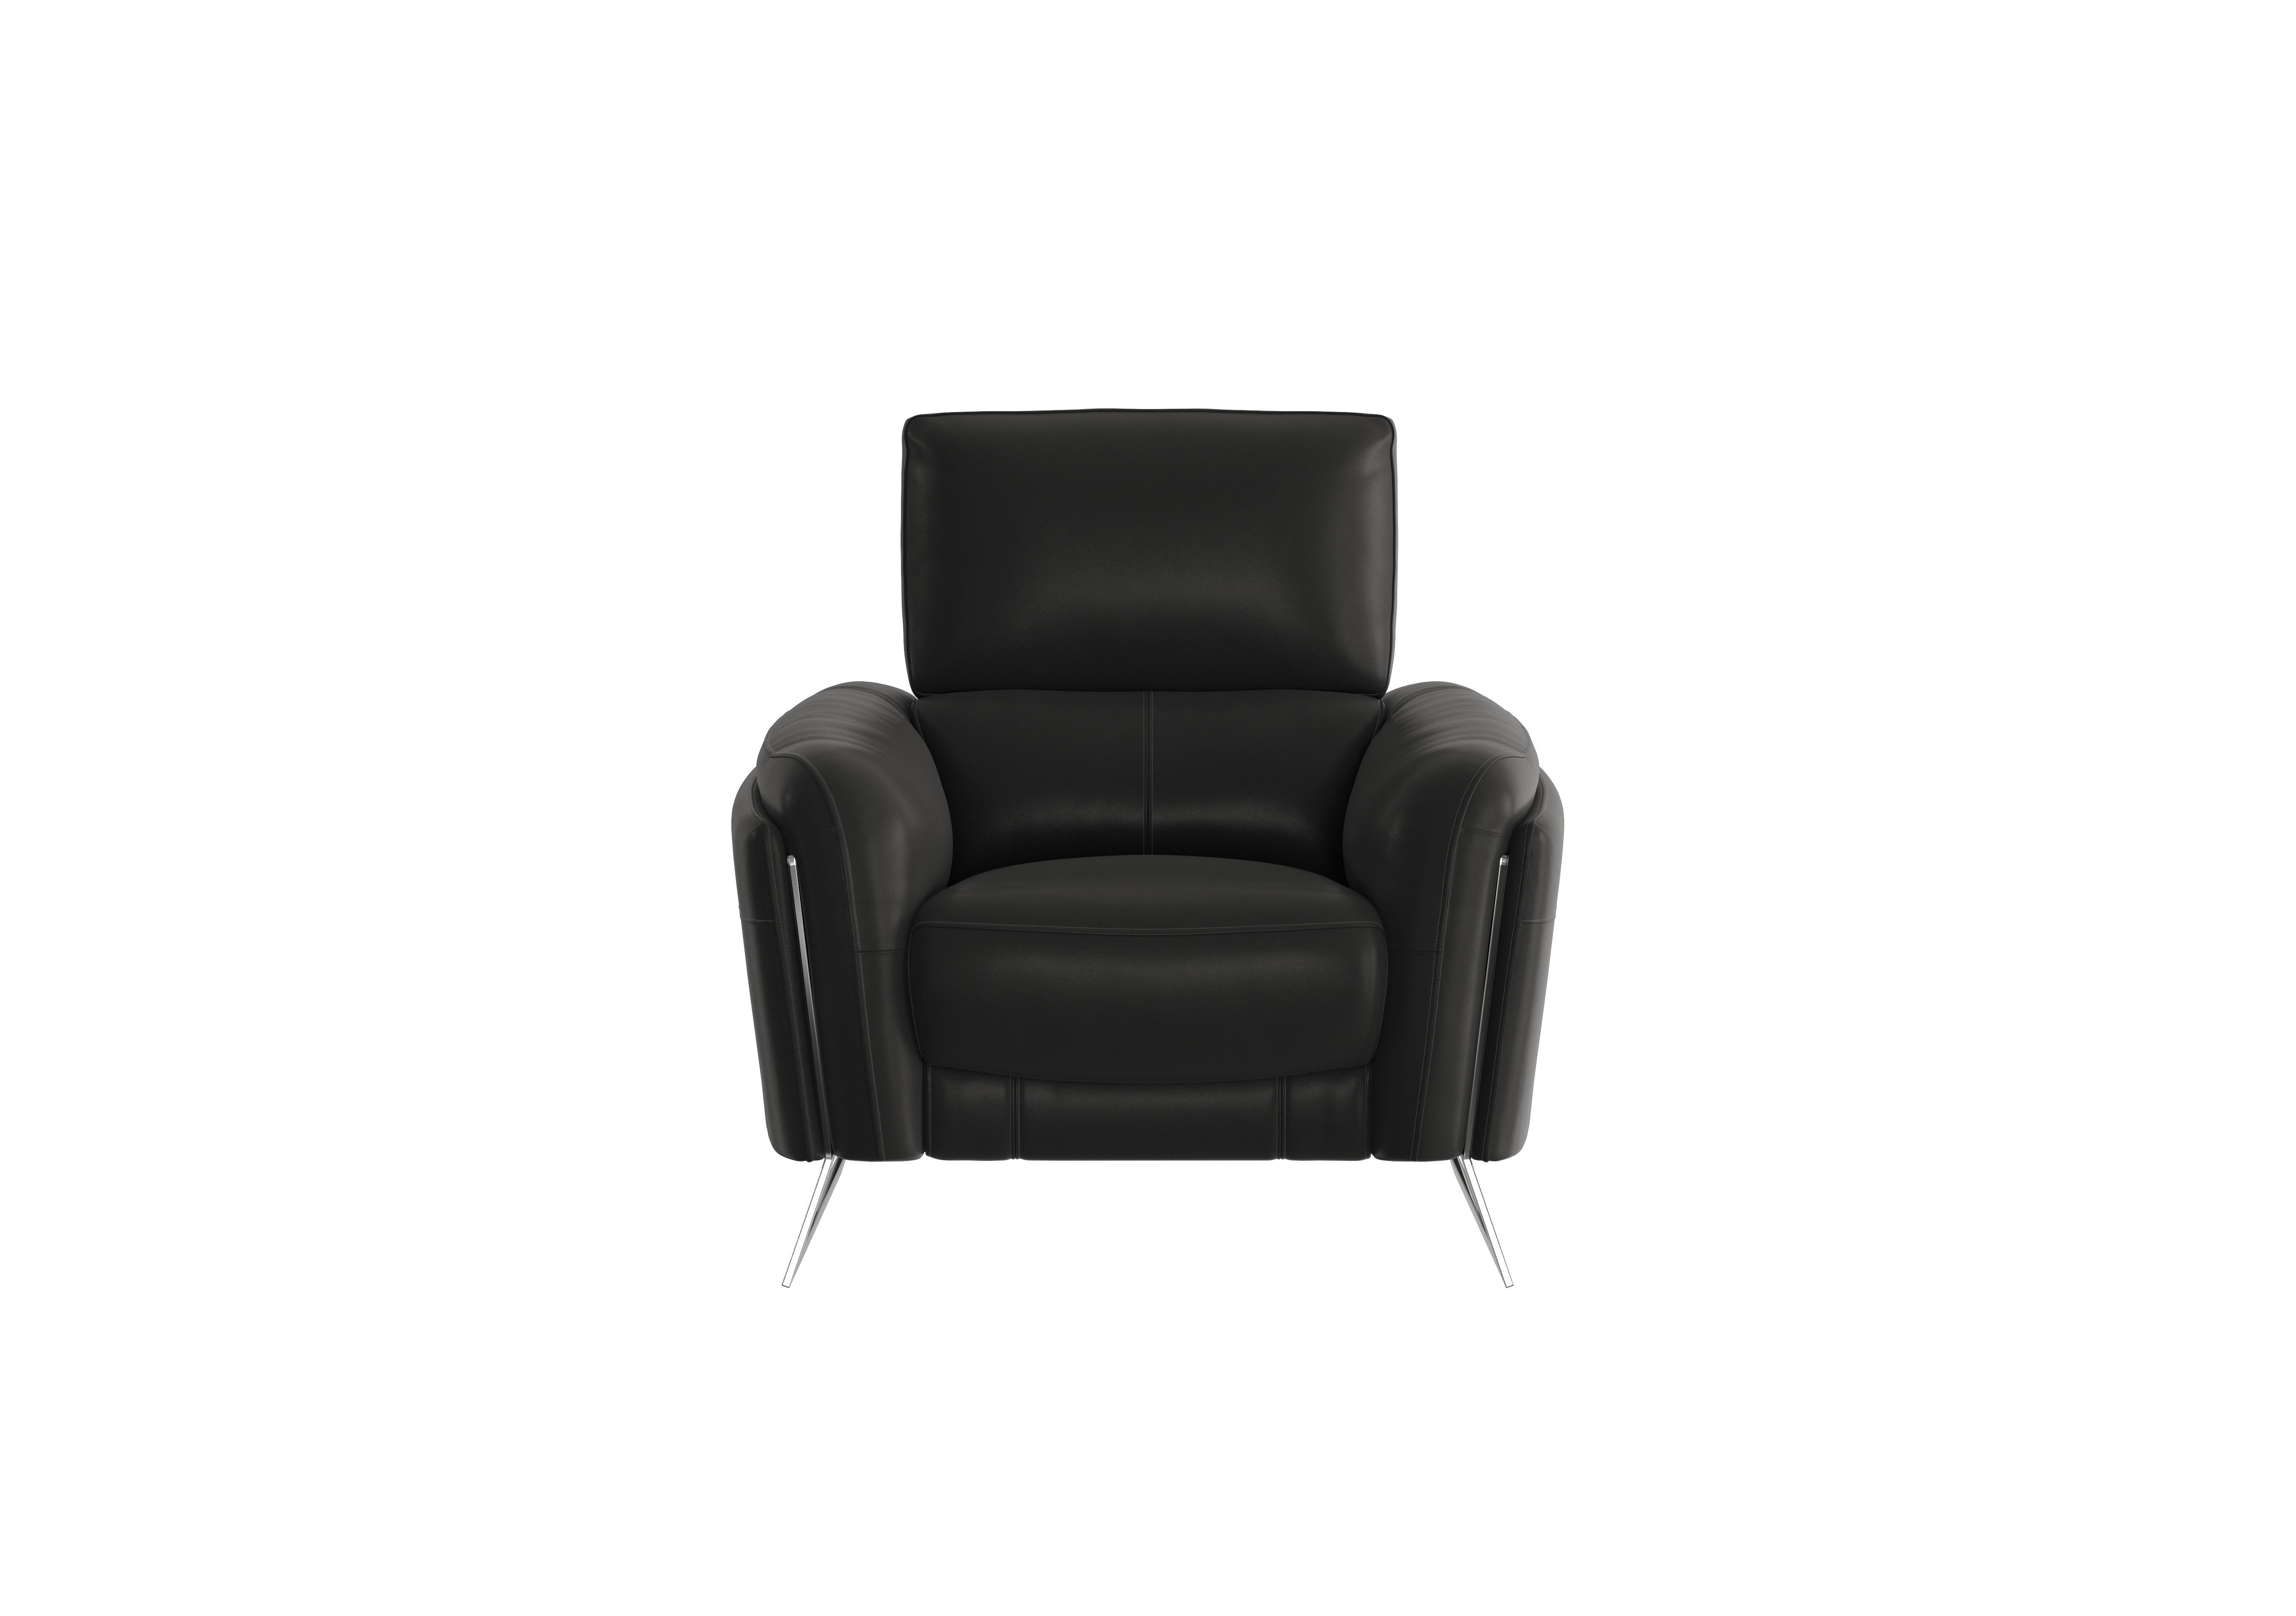 Amarilla Leather Armchair in Bv-3500 Classic Black on Furniture Village